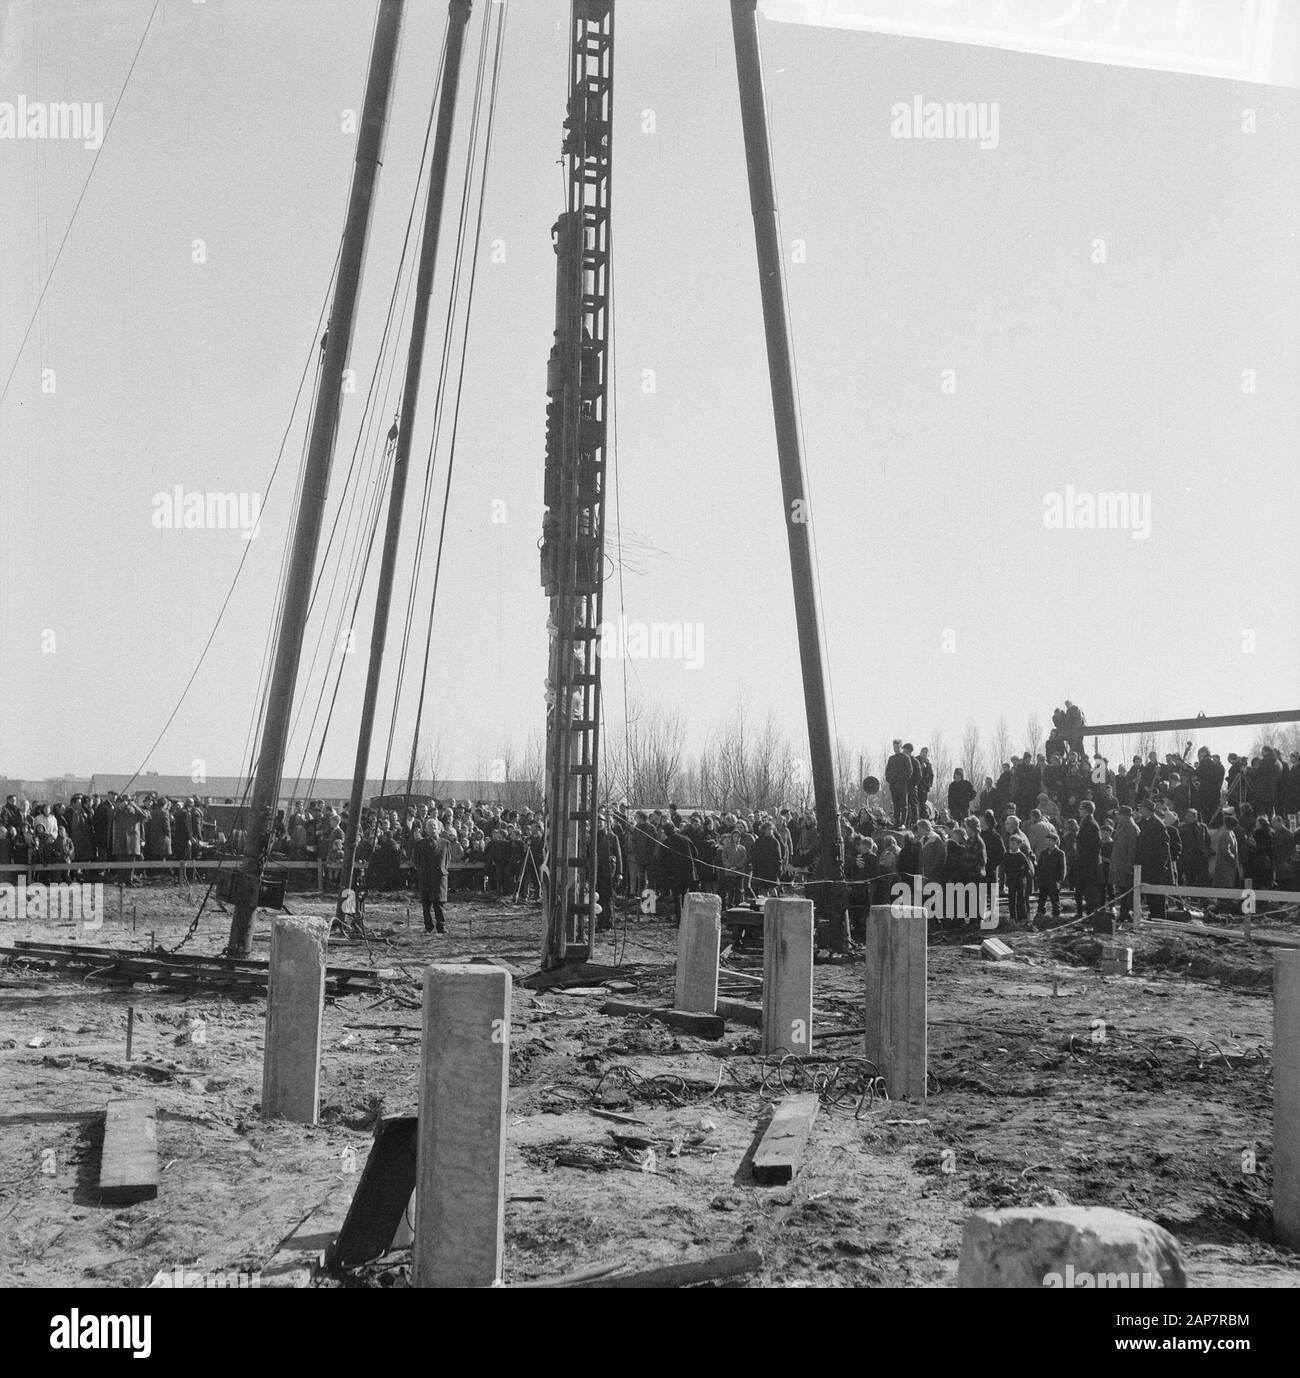 Mayor Van Hall 1e paal Institute Arts & Industry (Amstelveenseweg), reports and overviews Date: March 9, 1964 Keywords: mayors Stock Photo